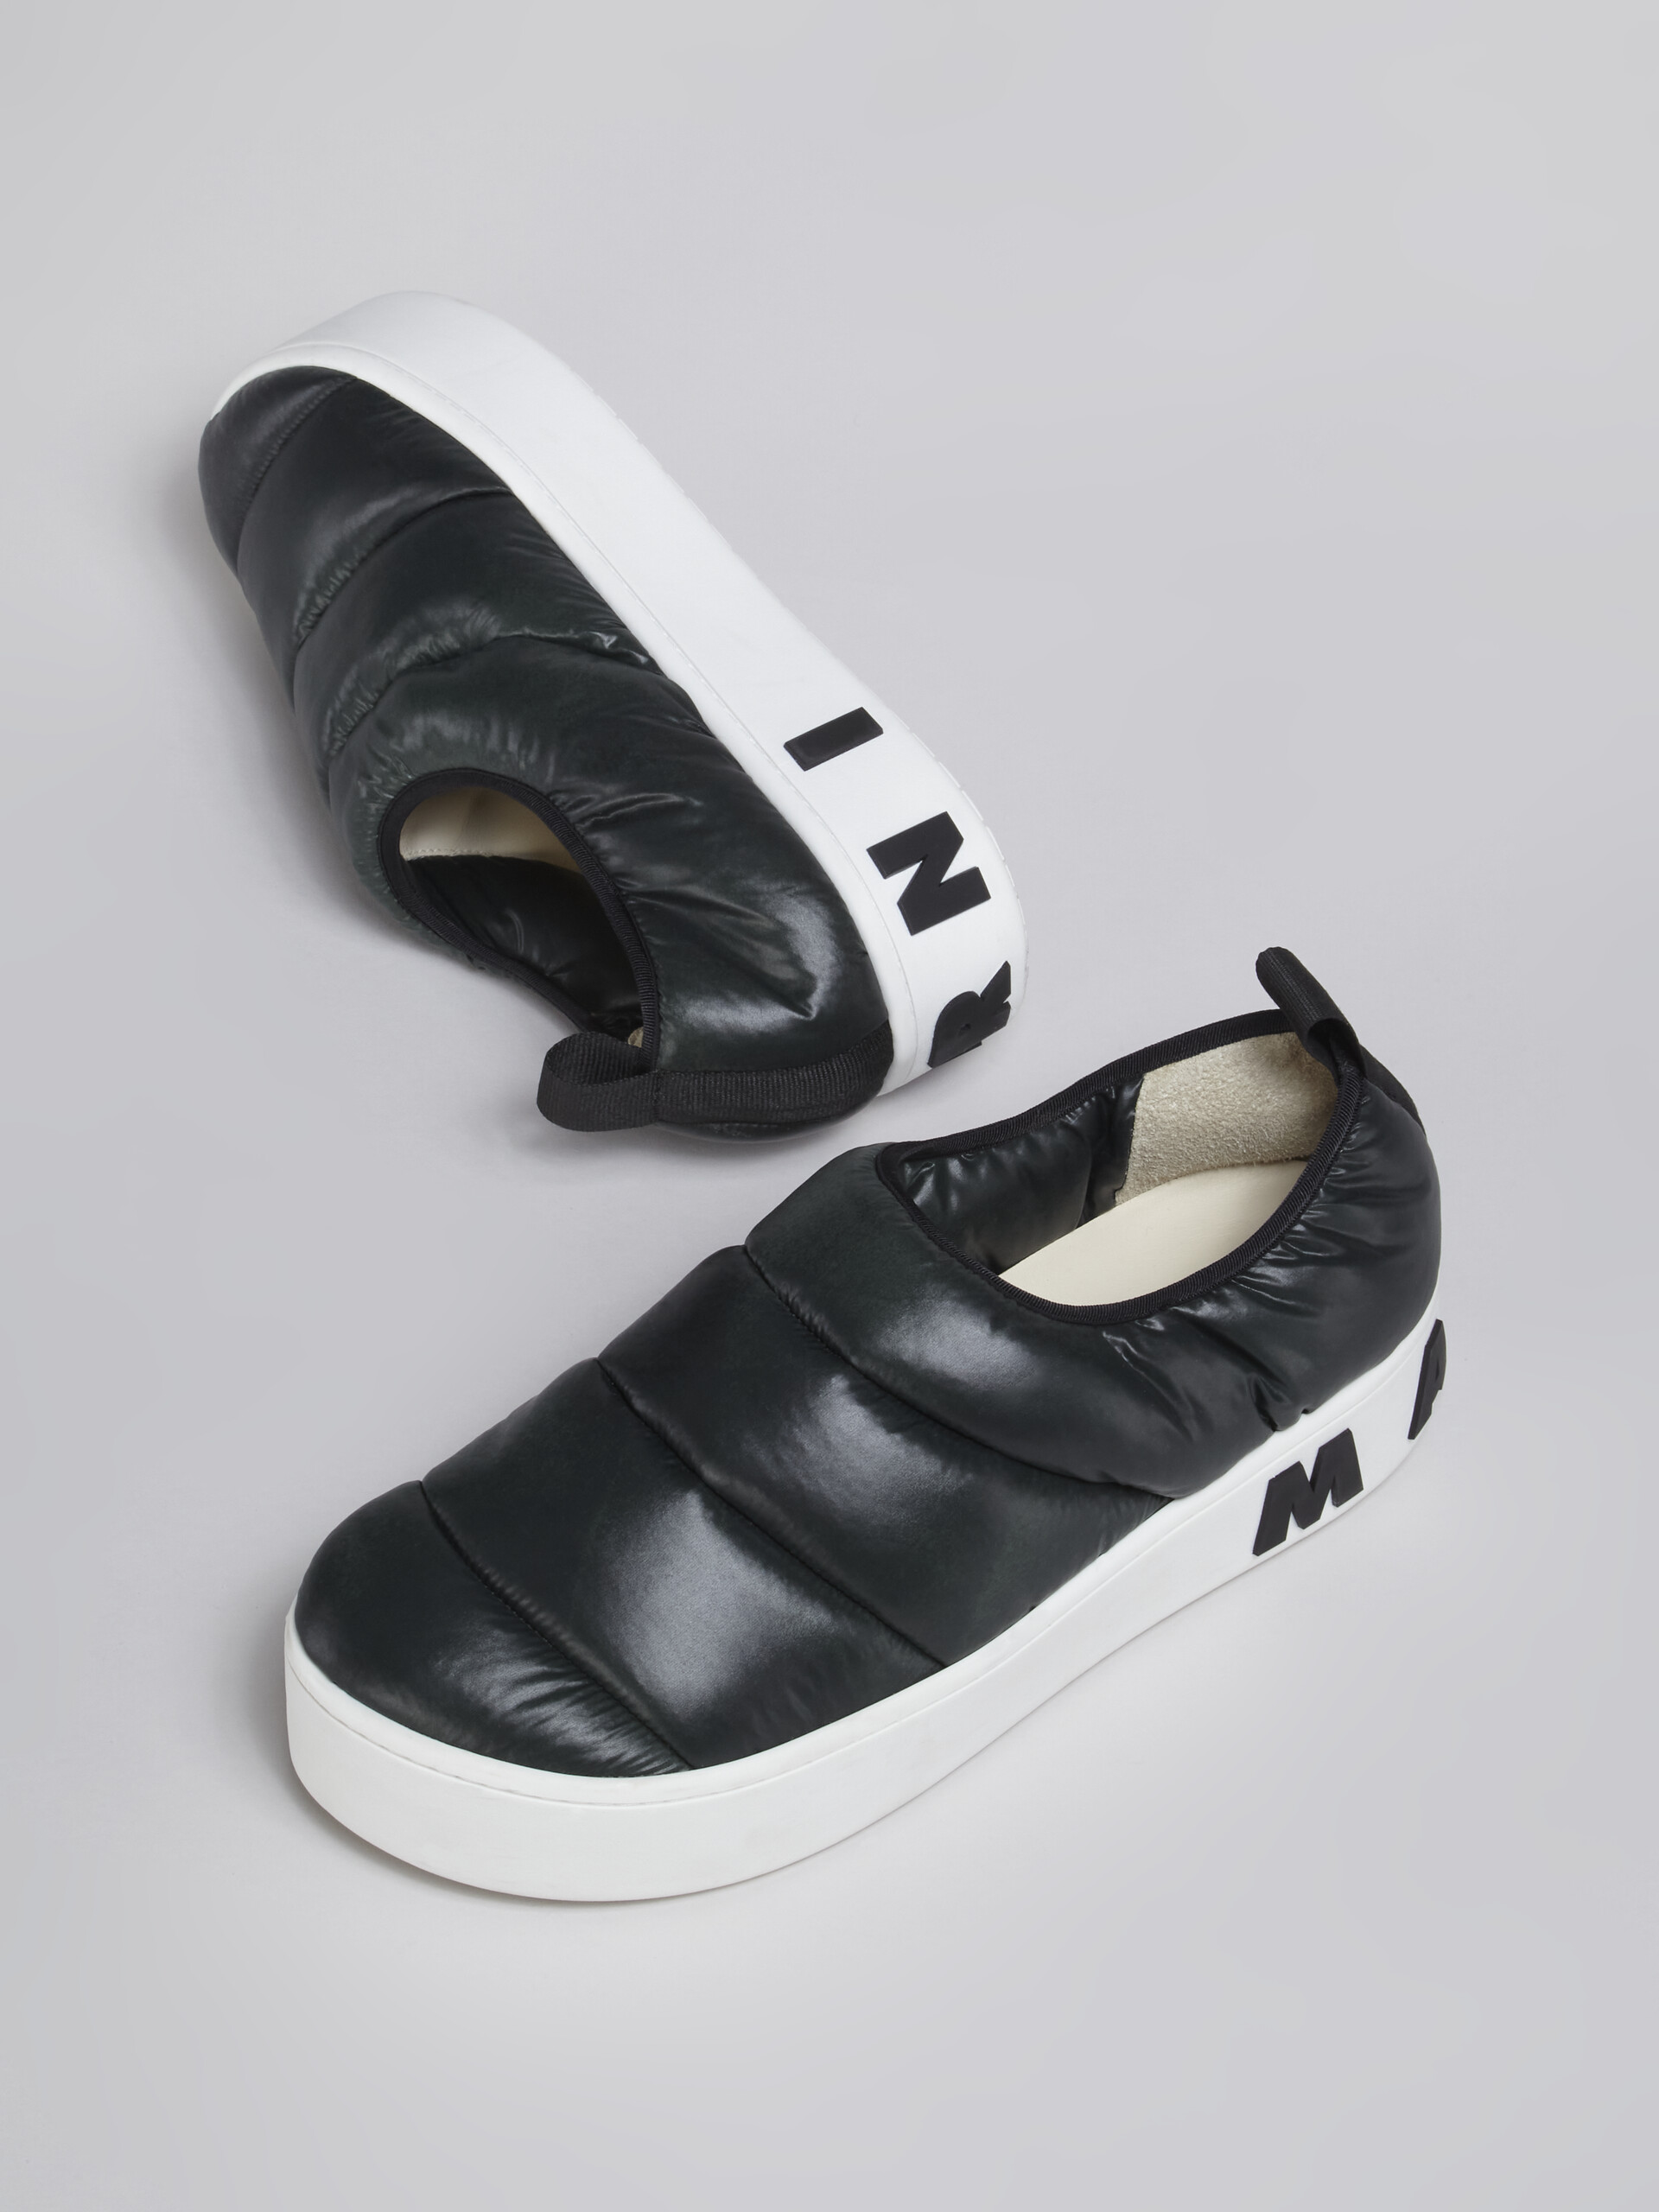 PAW slip-on sneaker in quilted nylon - Sneakers - Image 5